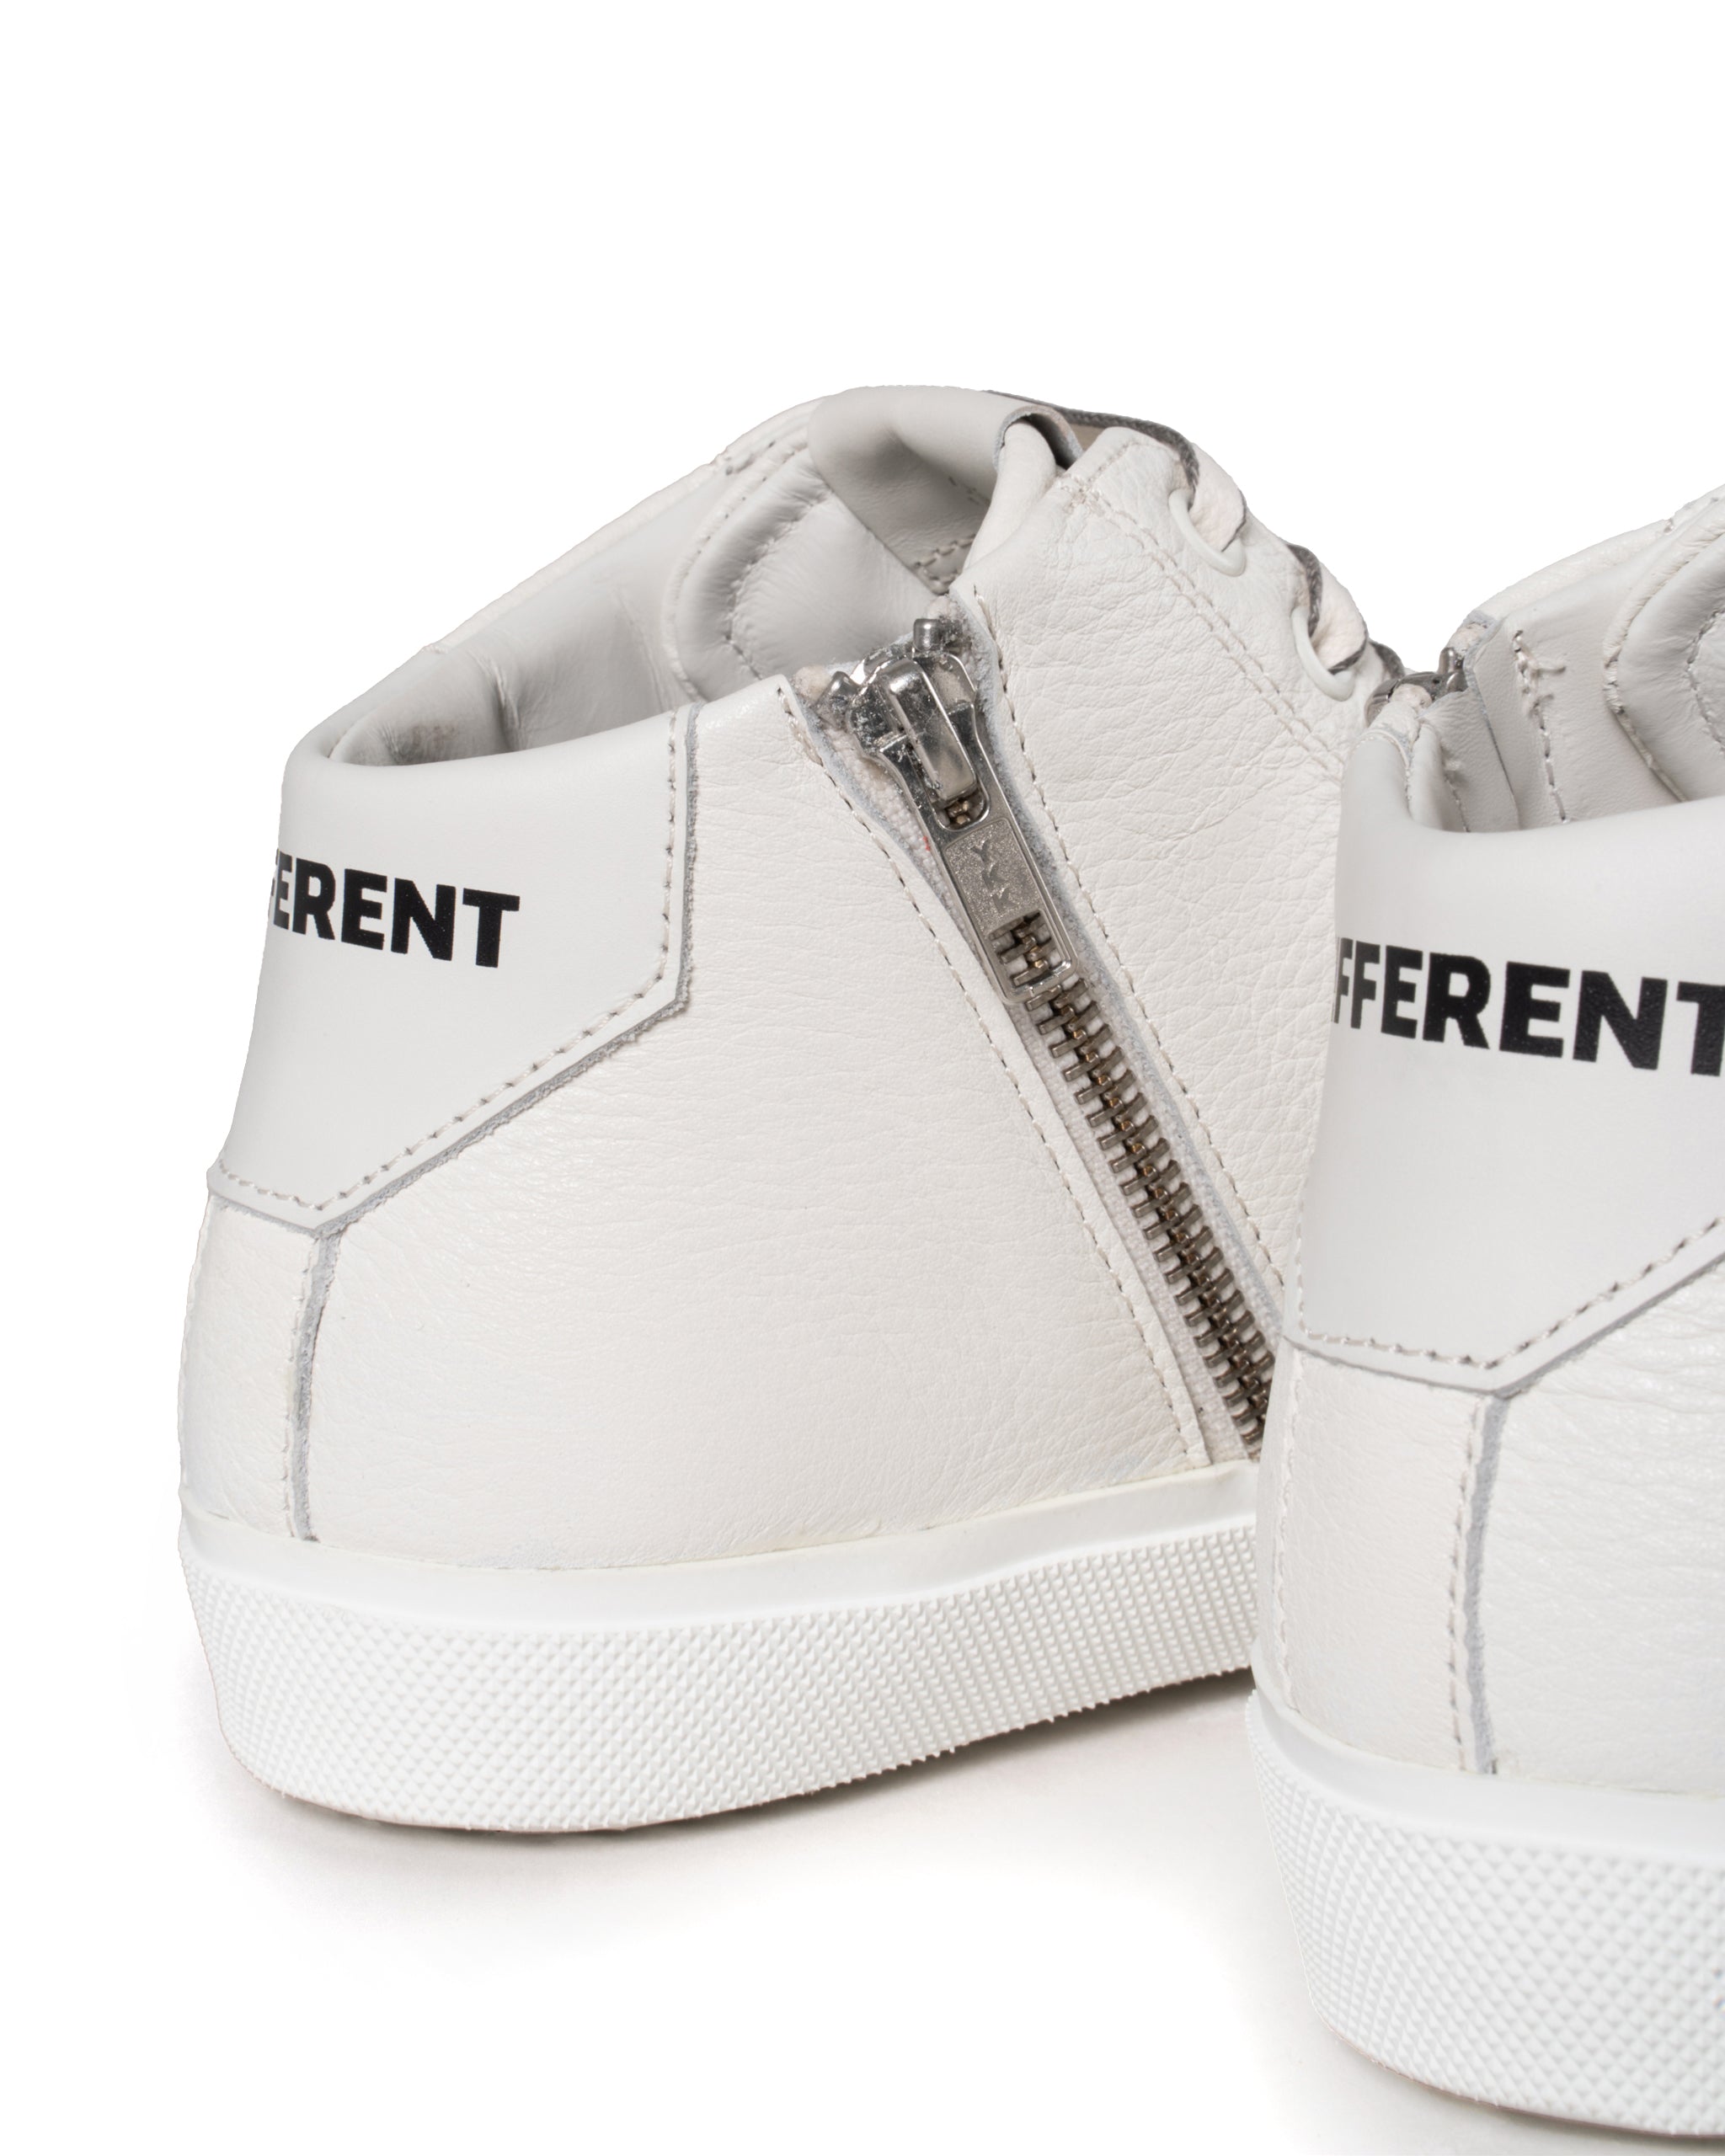 D!FFERENT LIMITED EDITION HIGH TOP